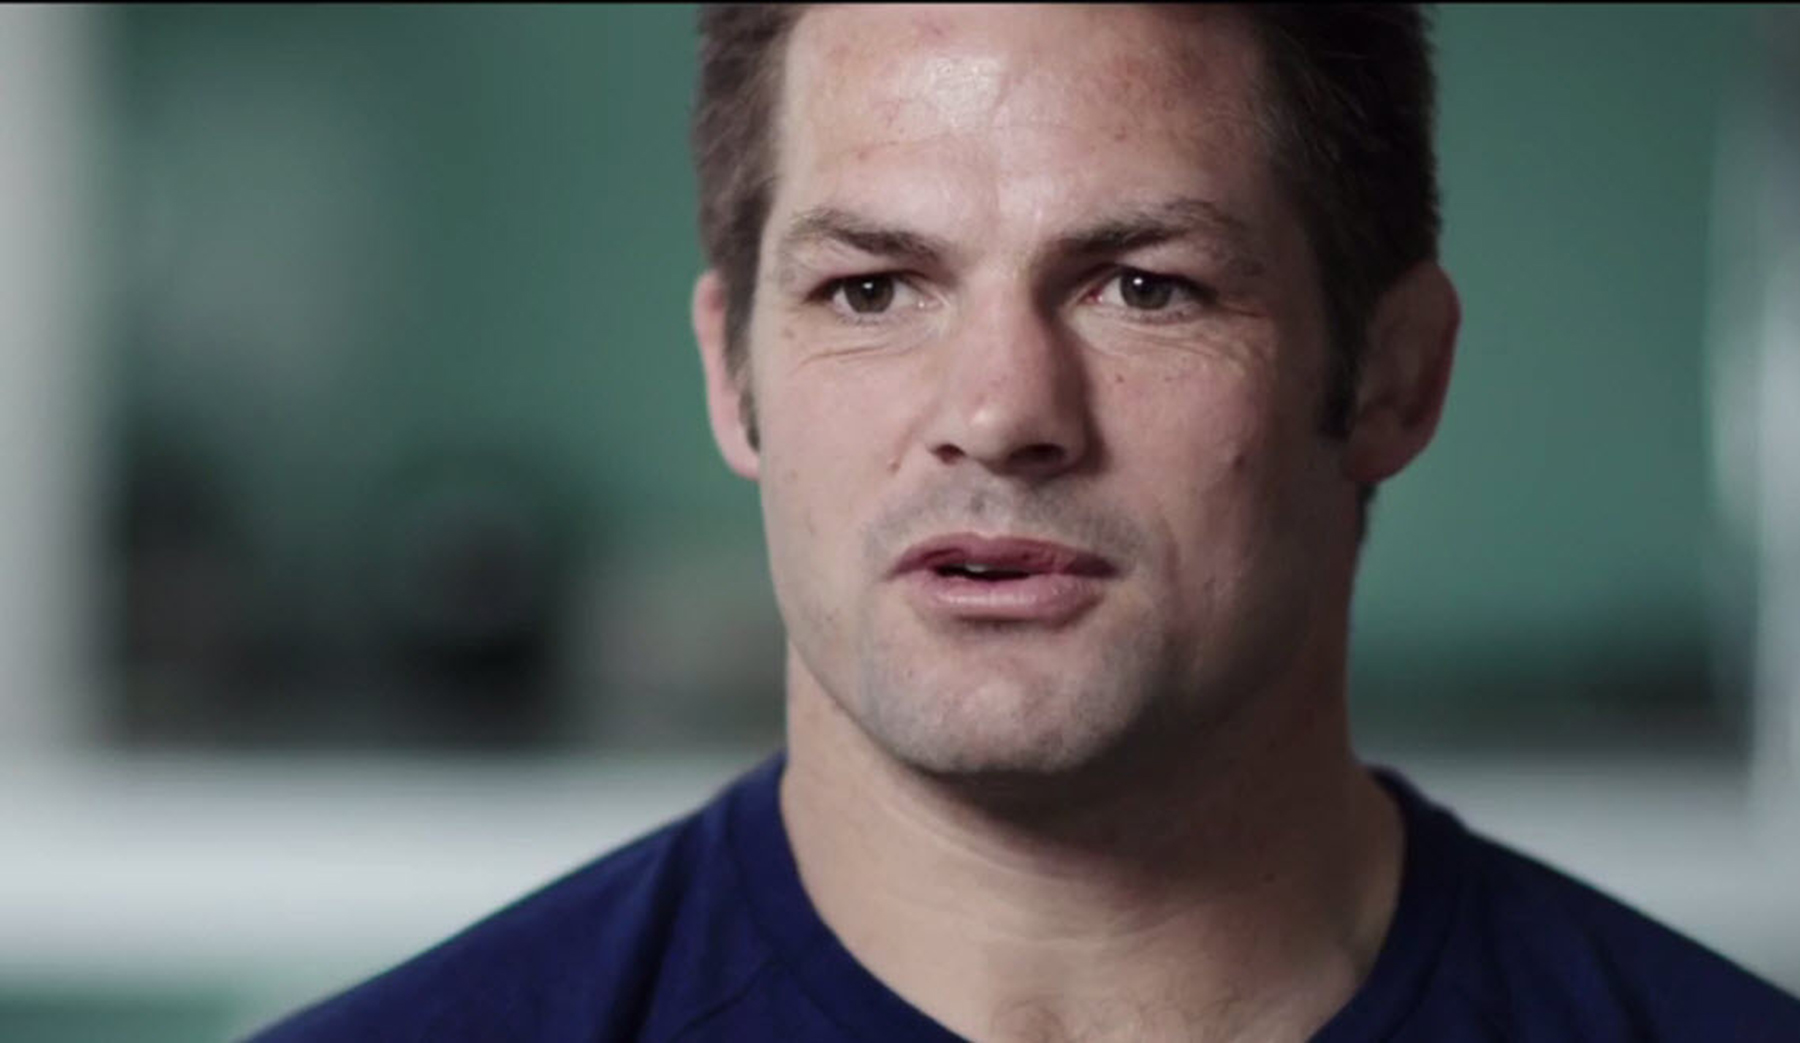 All Black star Richie McCaw makes his film debut in September